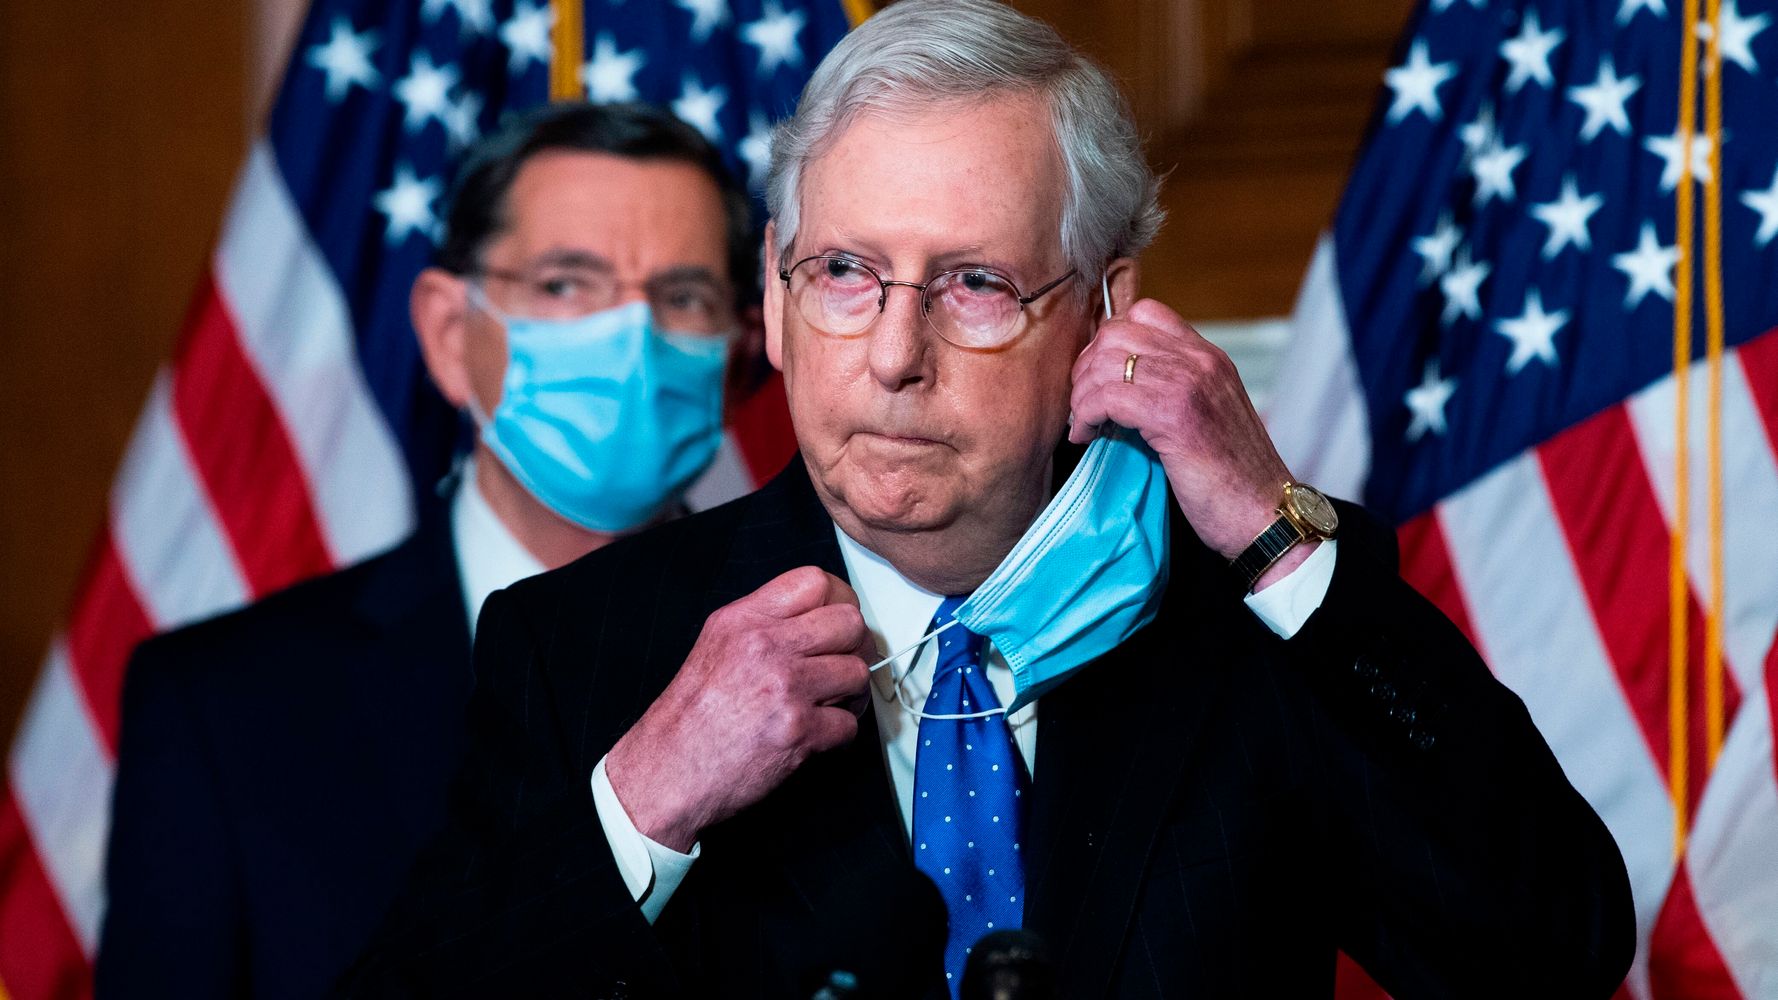 Mitch McConnell's Liability Shield Is Major Holdup For COVID-19 Deal